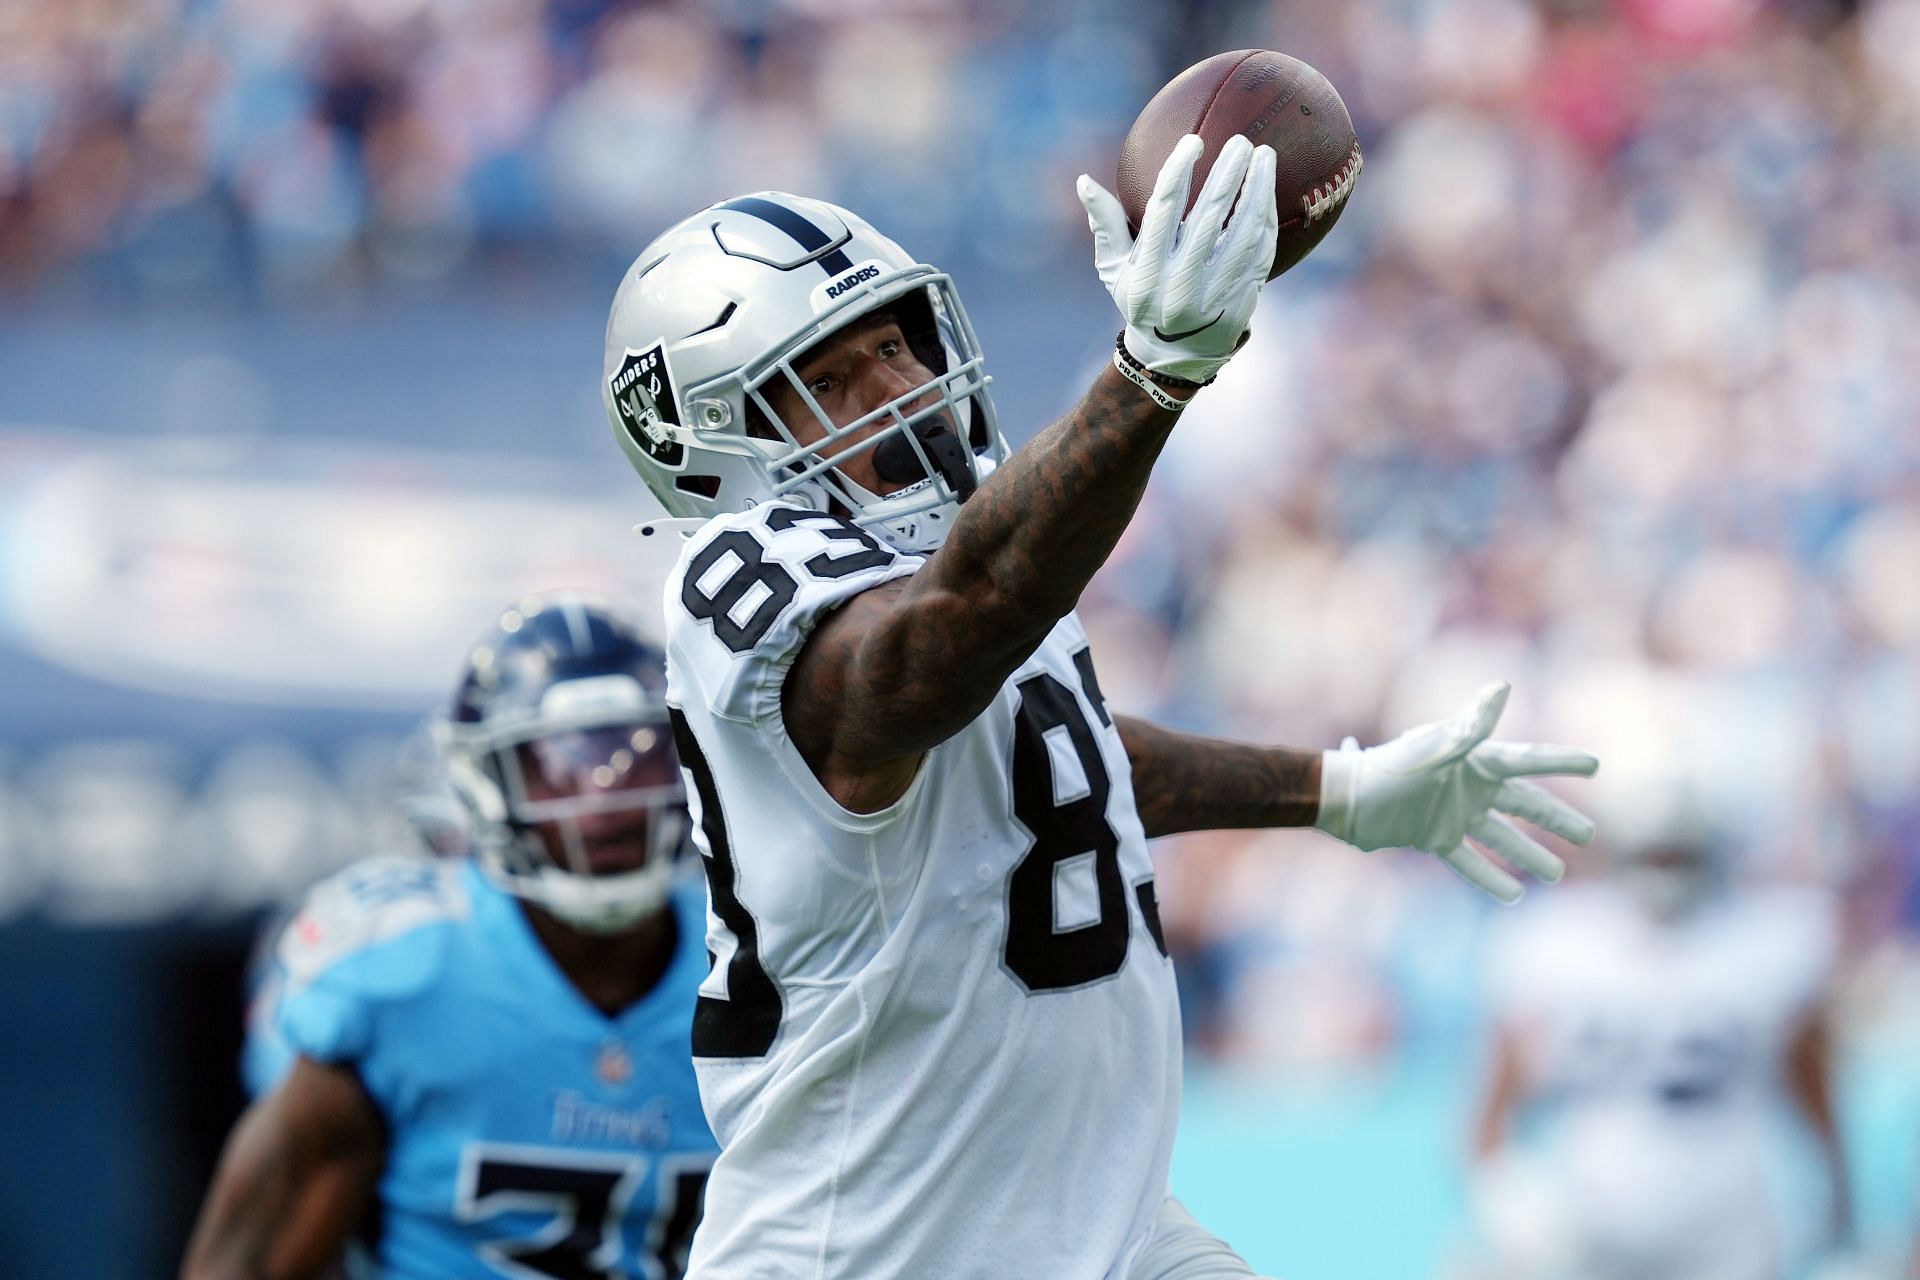 Darren Waller catches the ball against the Tennessee Titans